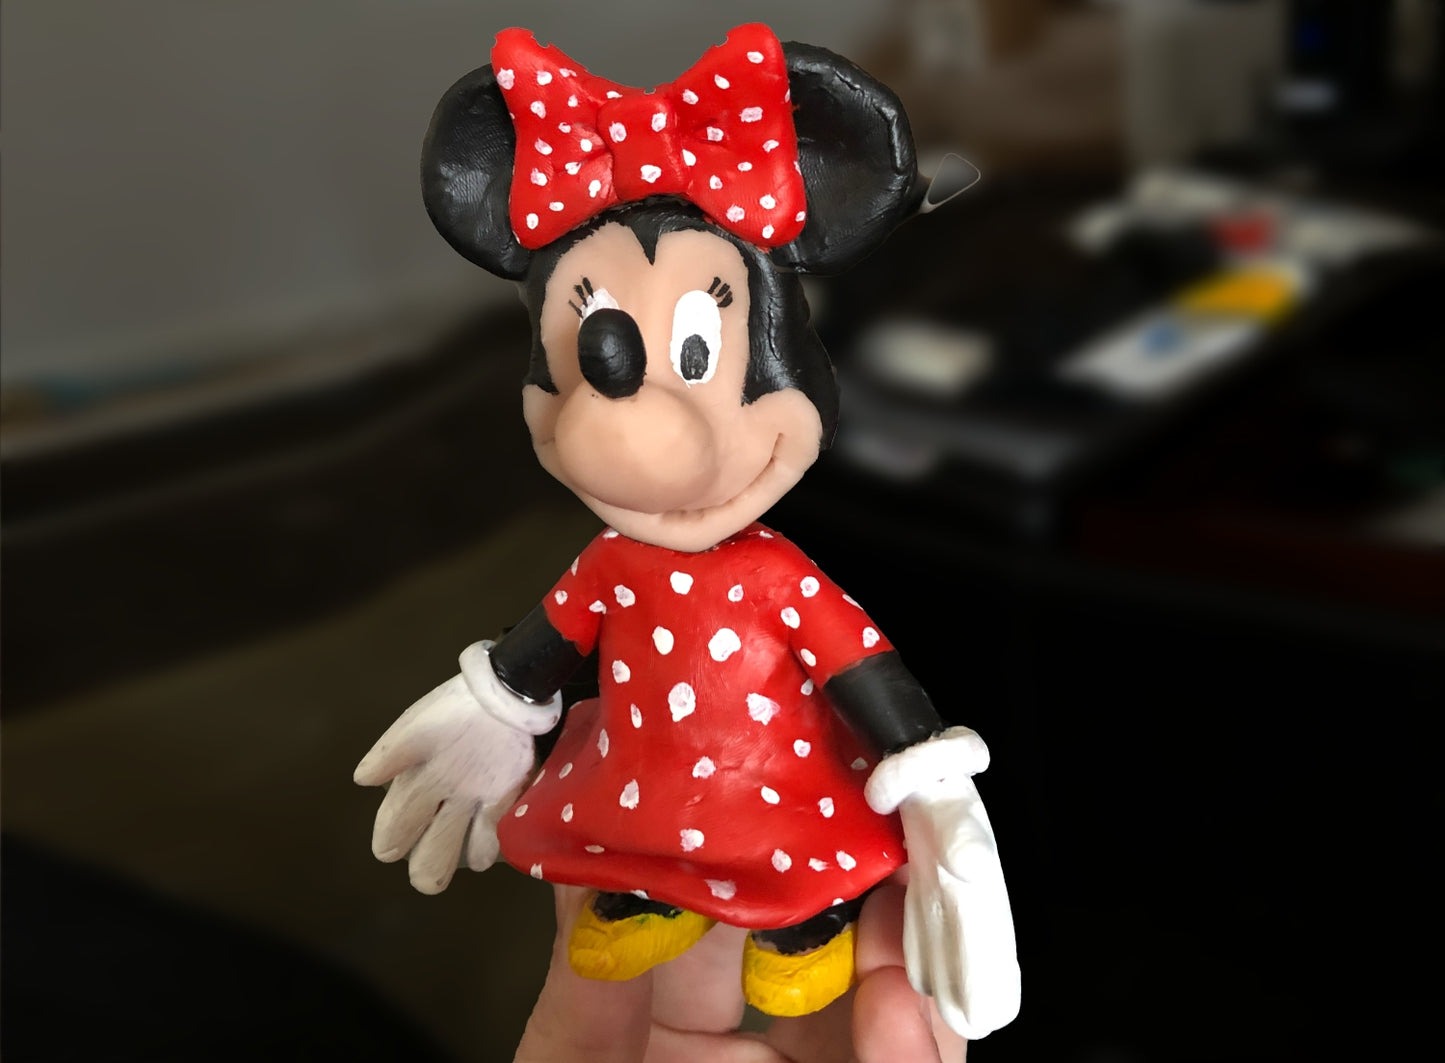 Completed Minnie Mouse sculpture.